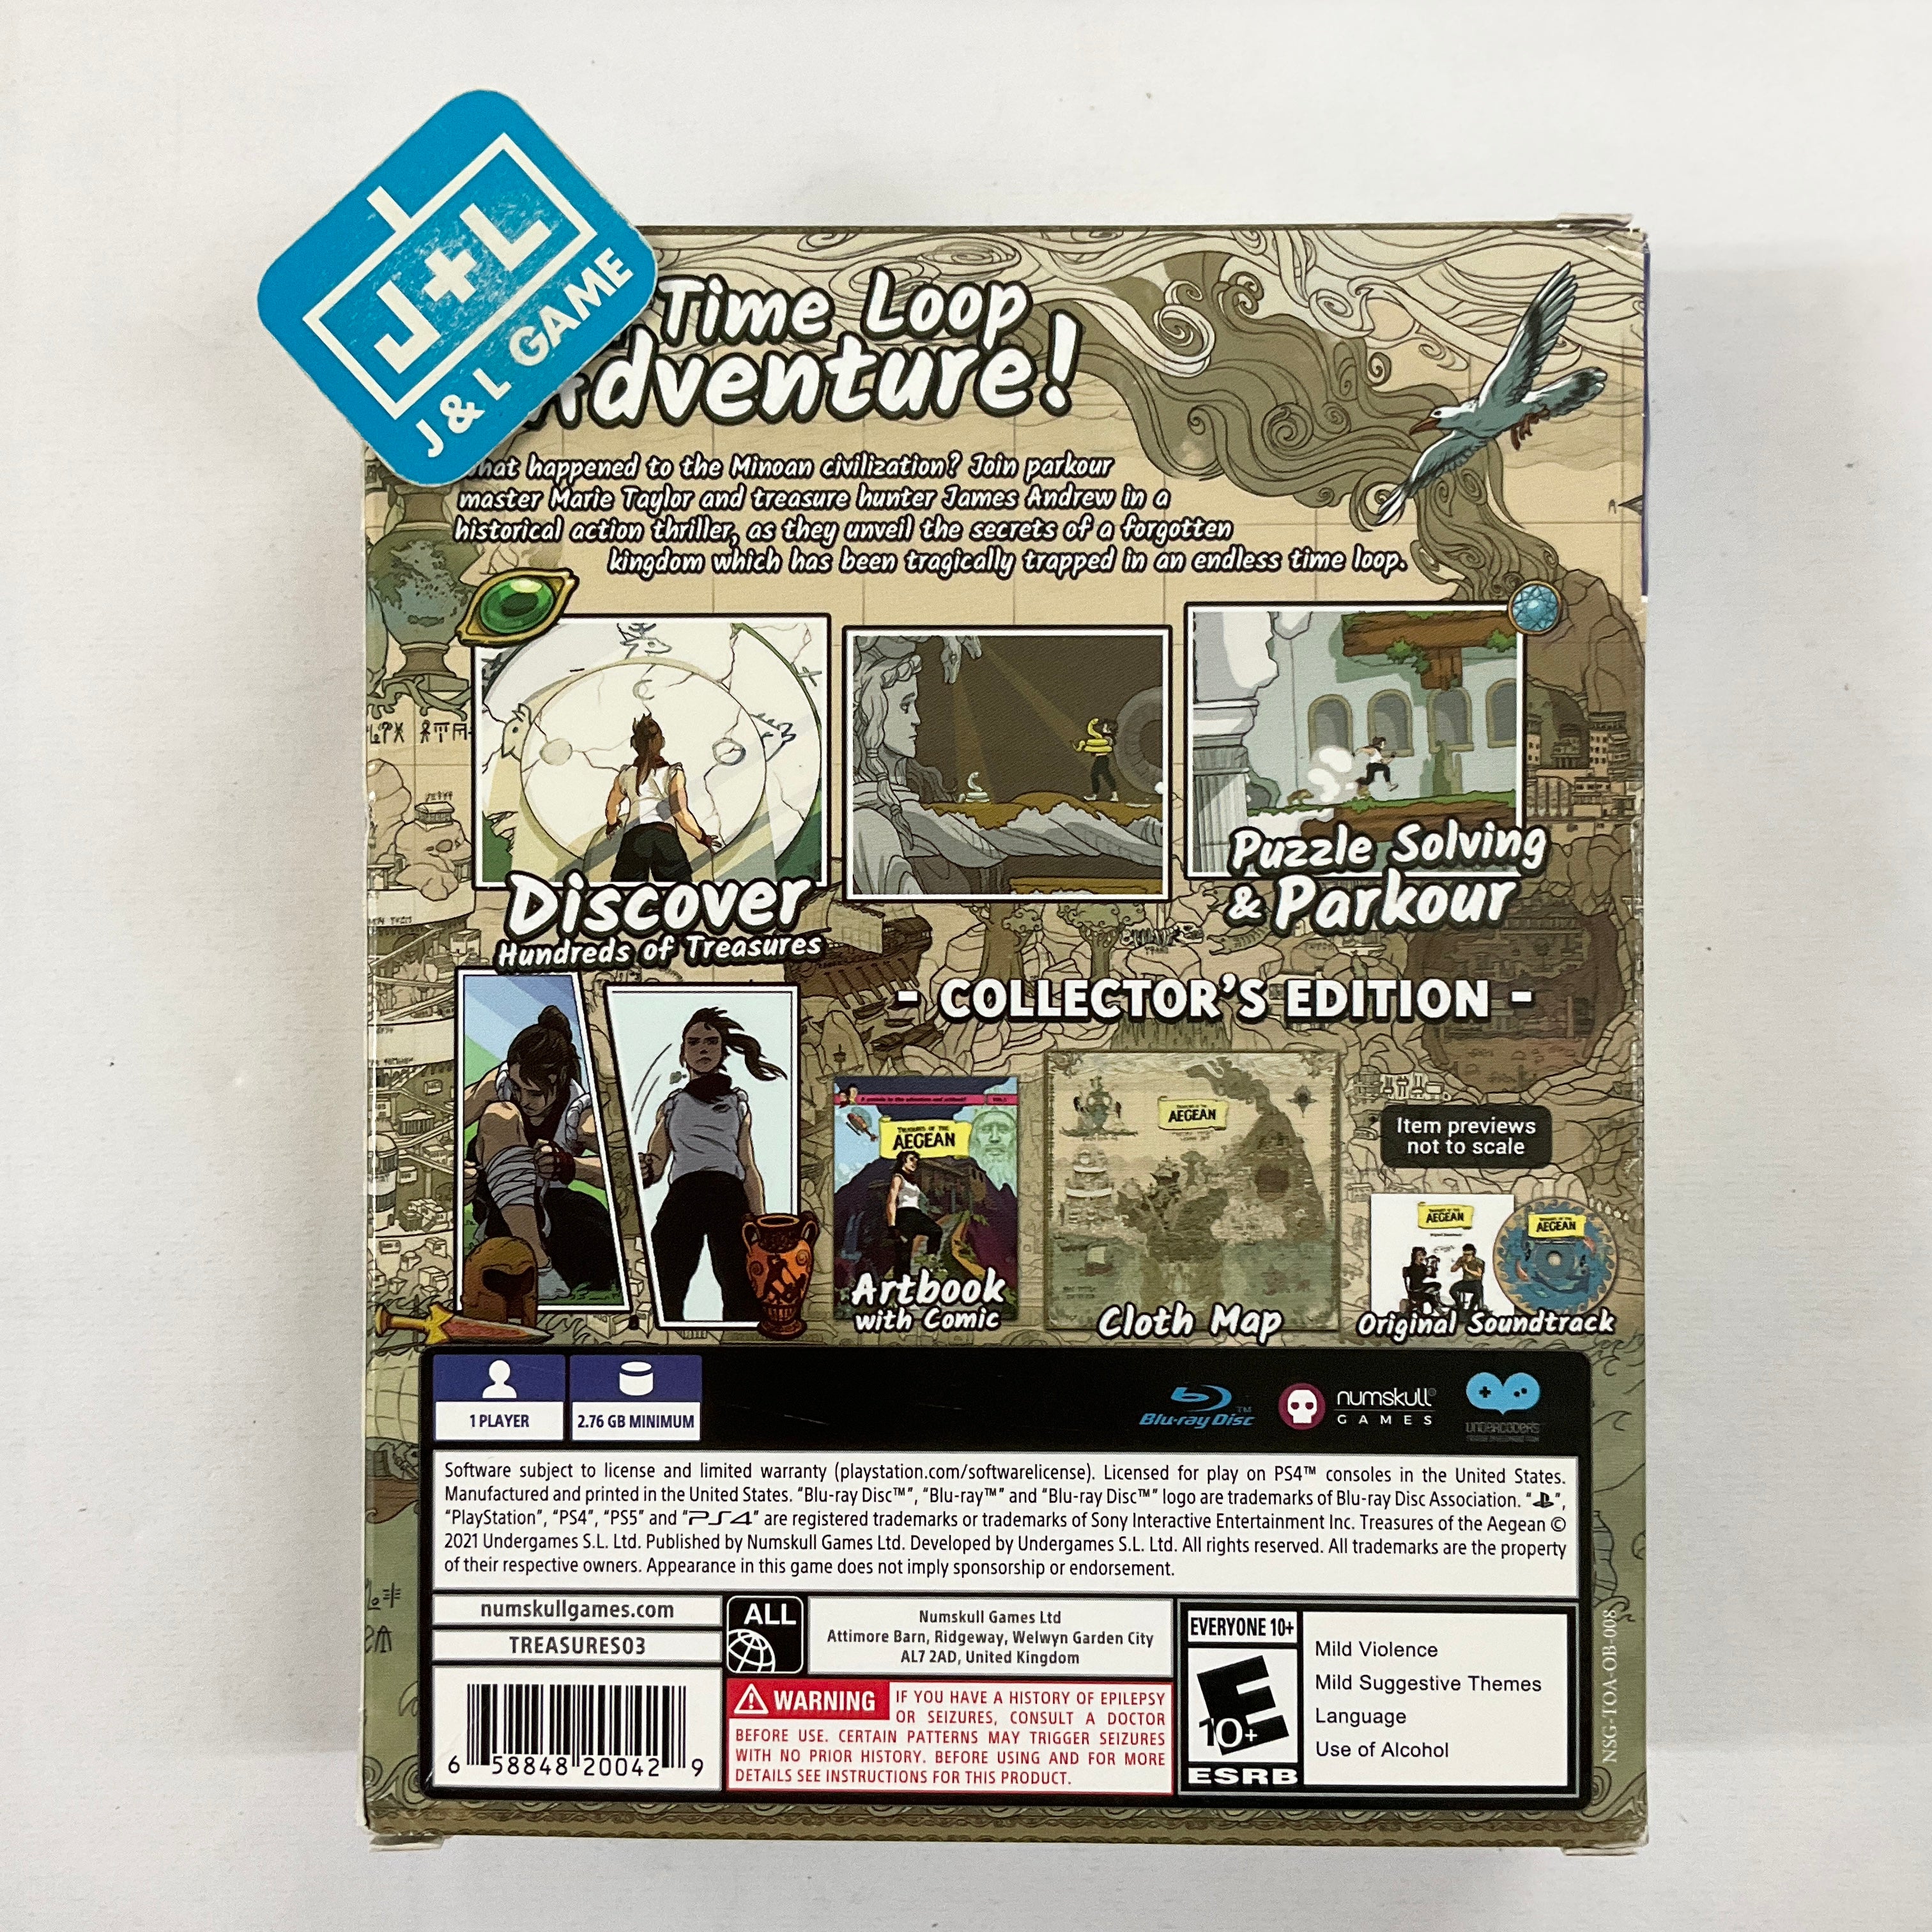 Treasures of the Aegean (Collector's Edition) - (PS4) PlayStation 4 [Pre-Owned]